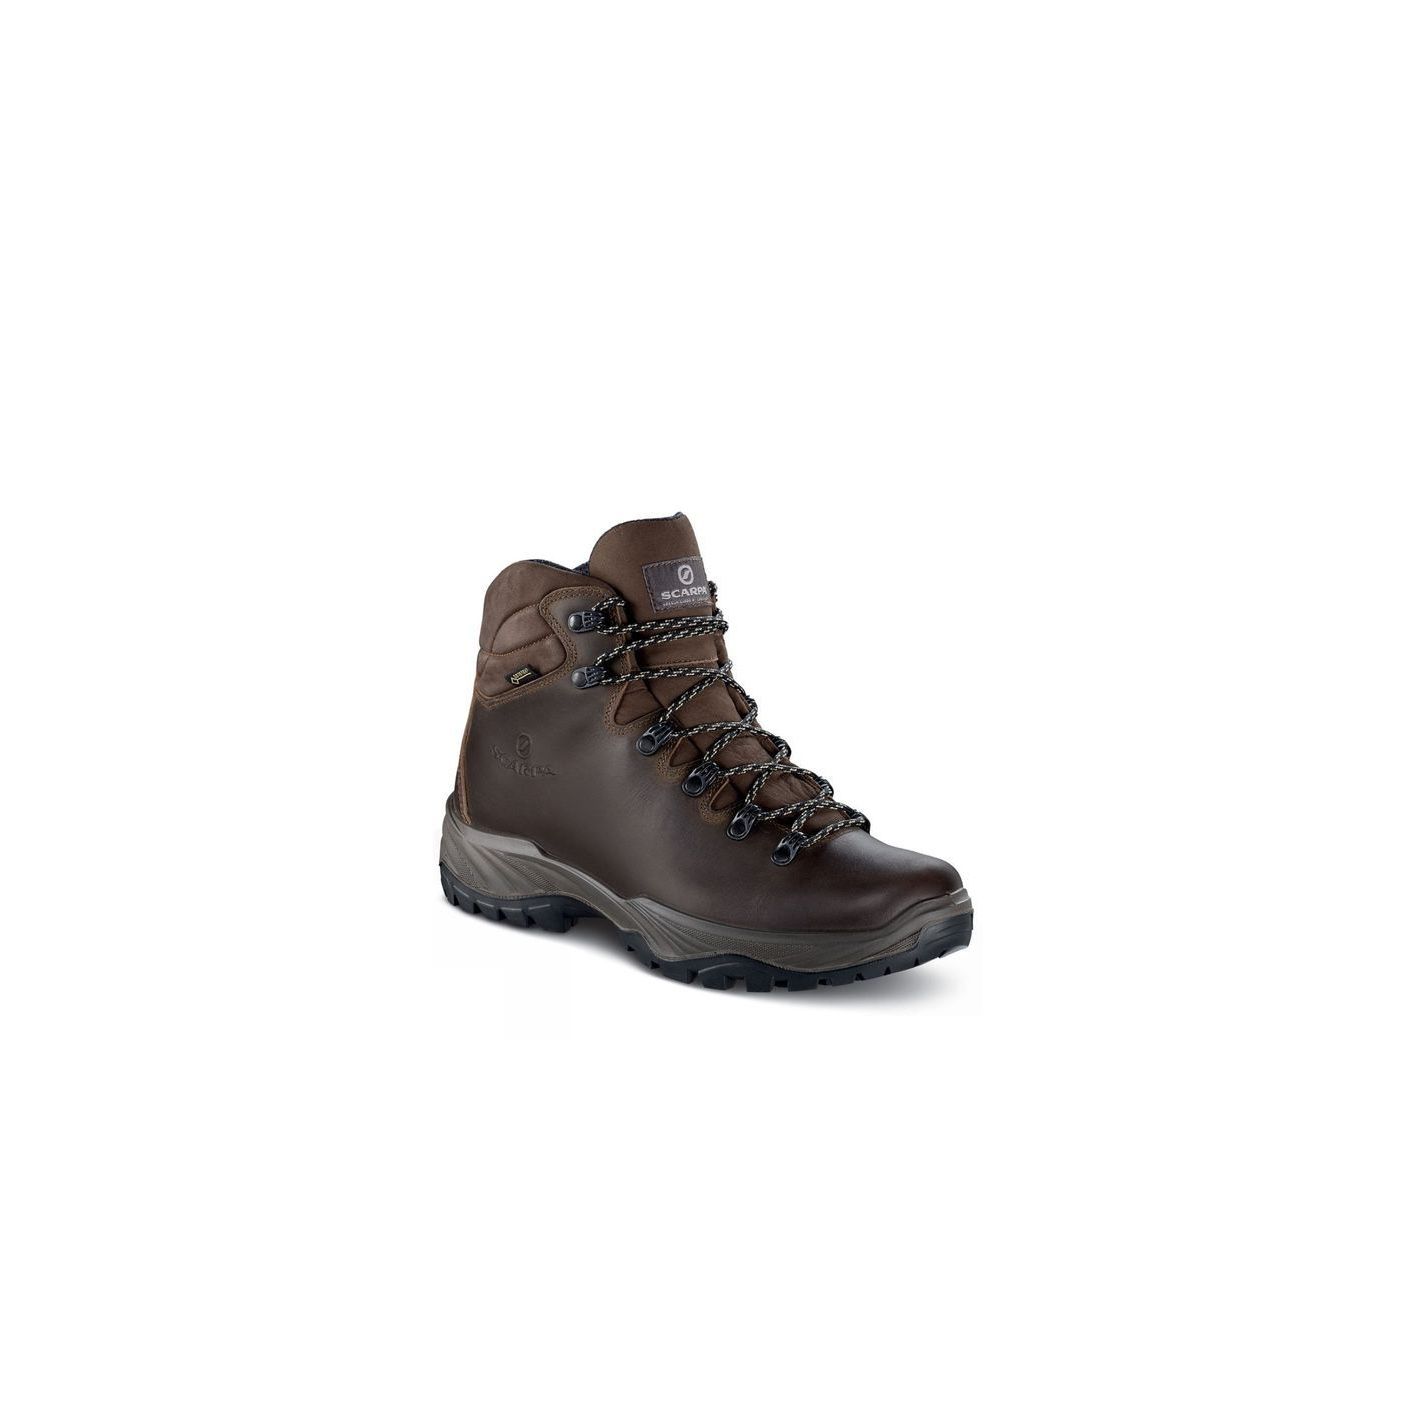 mens leather walking boots uk